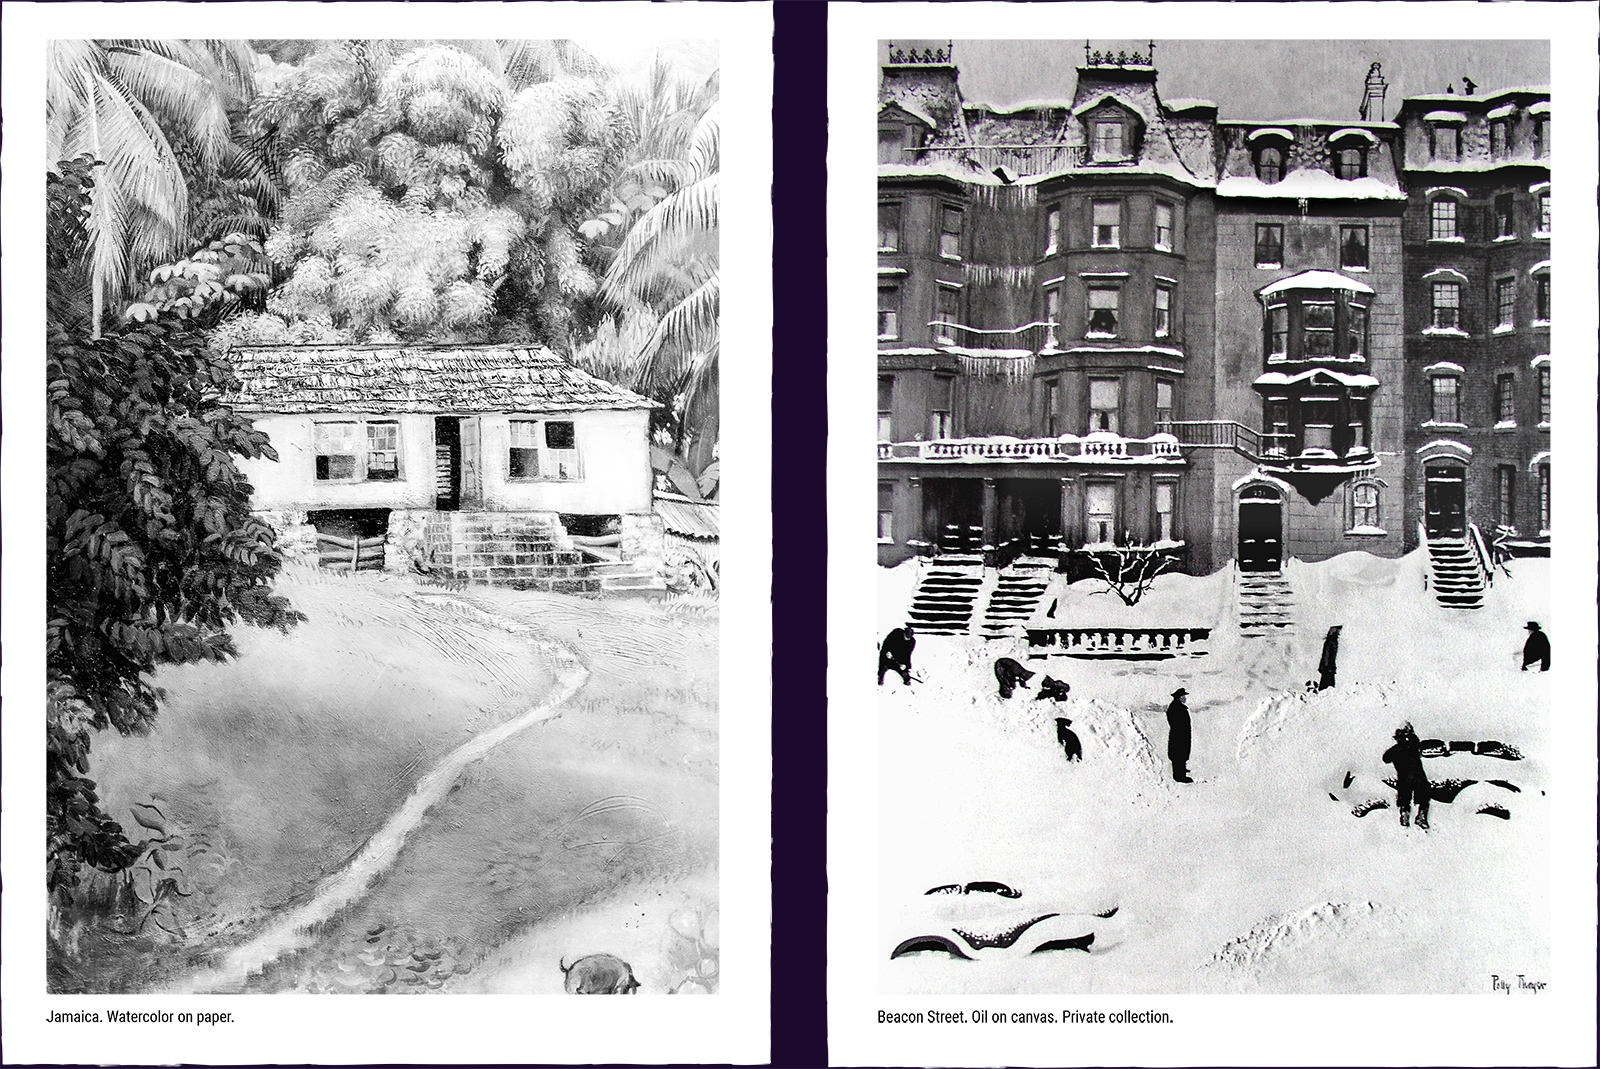 Two landscape paintings. (1) Jamaica. Watercolor on paper. (2) Beacon Street. Oil on canvas. Private collection.